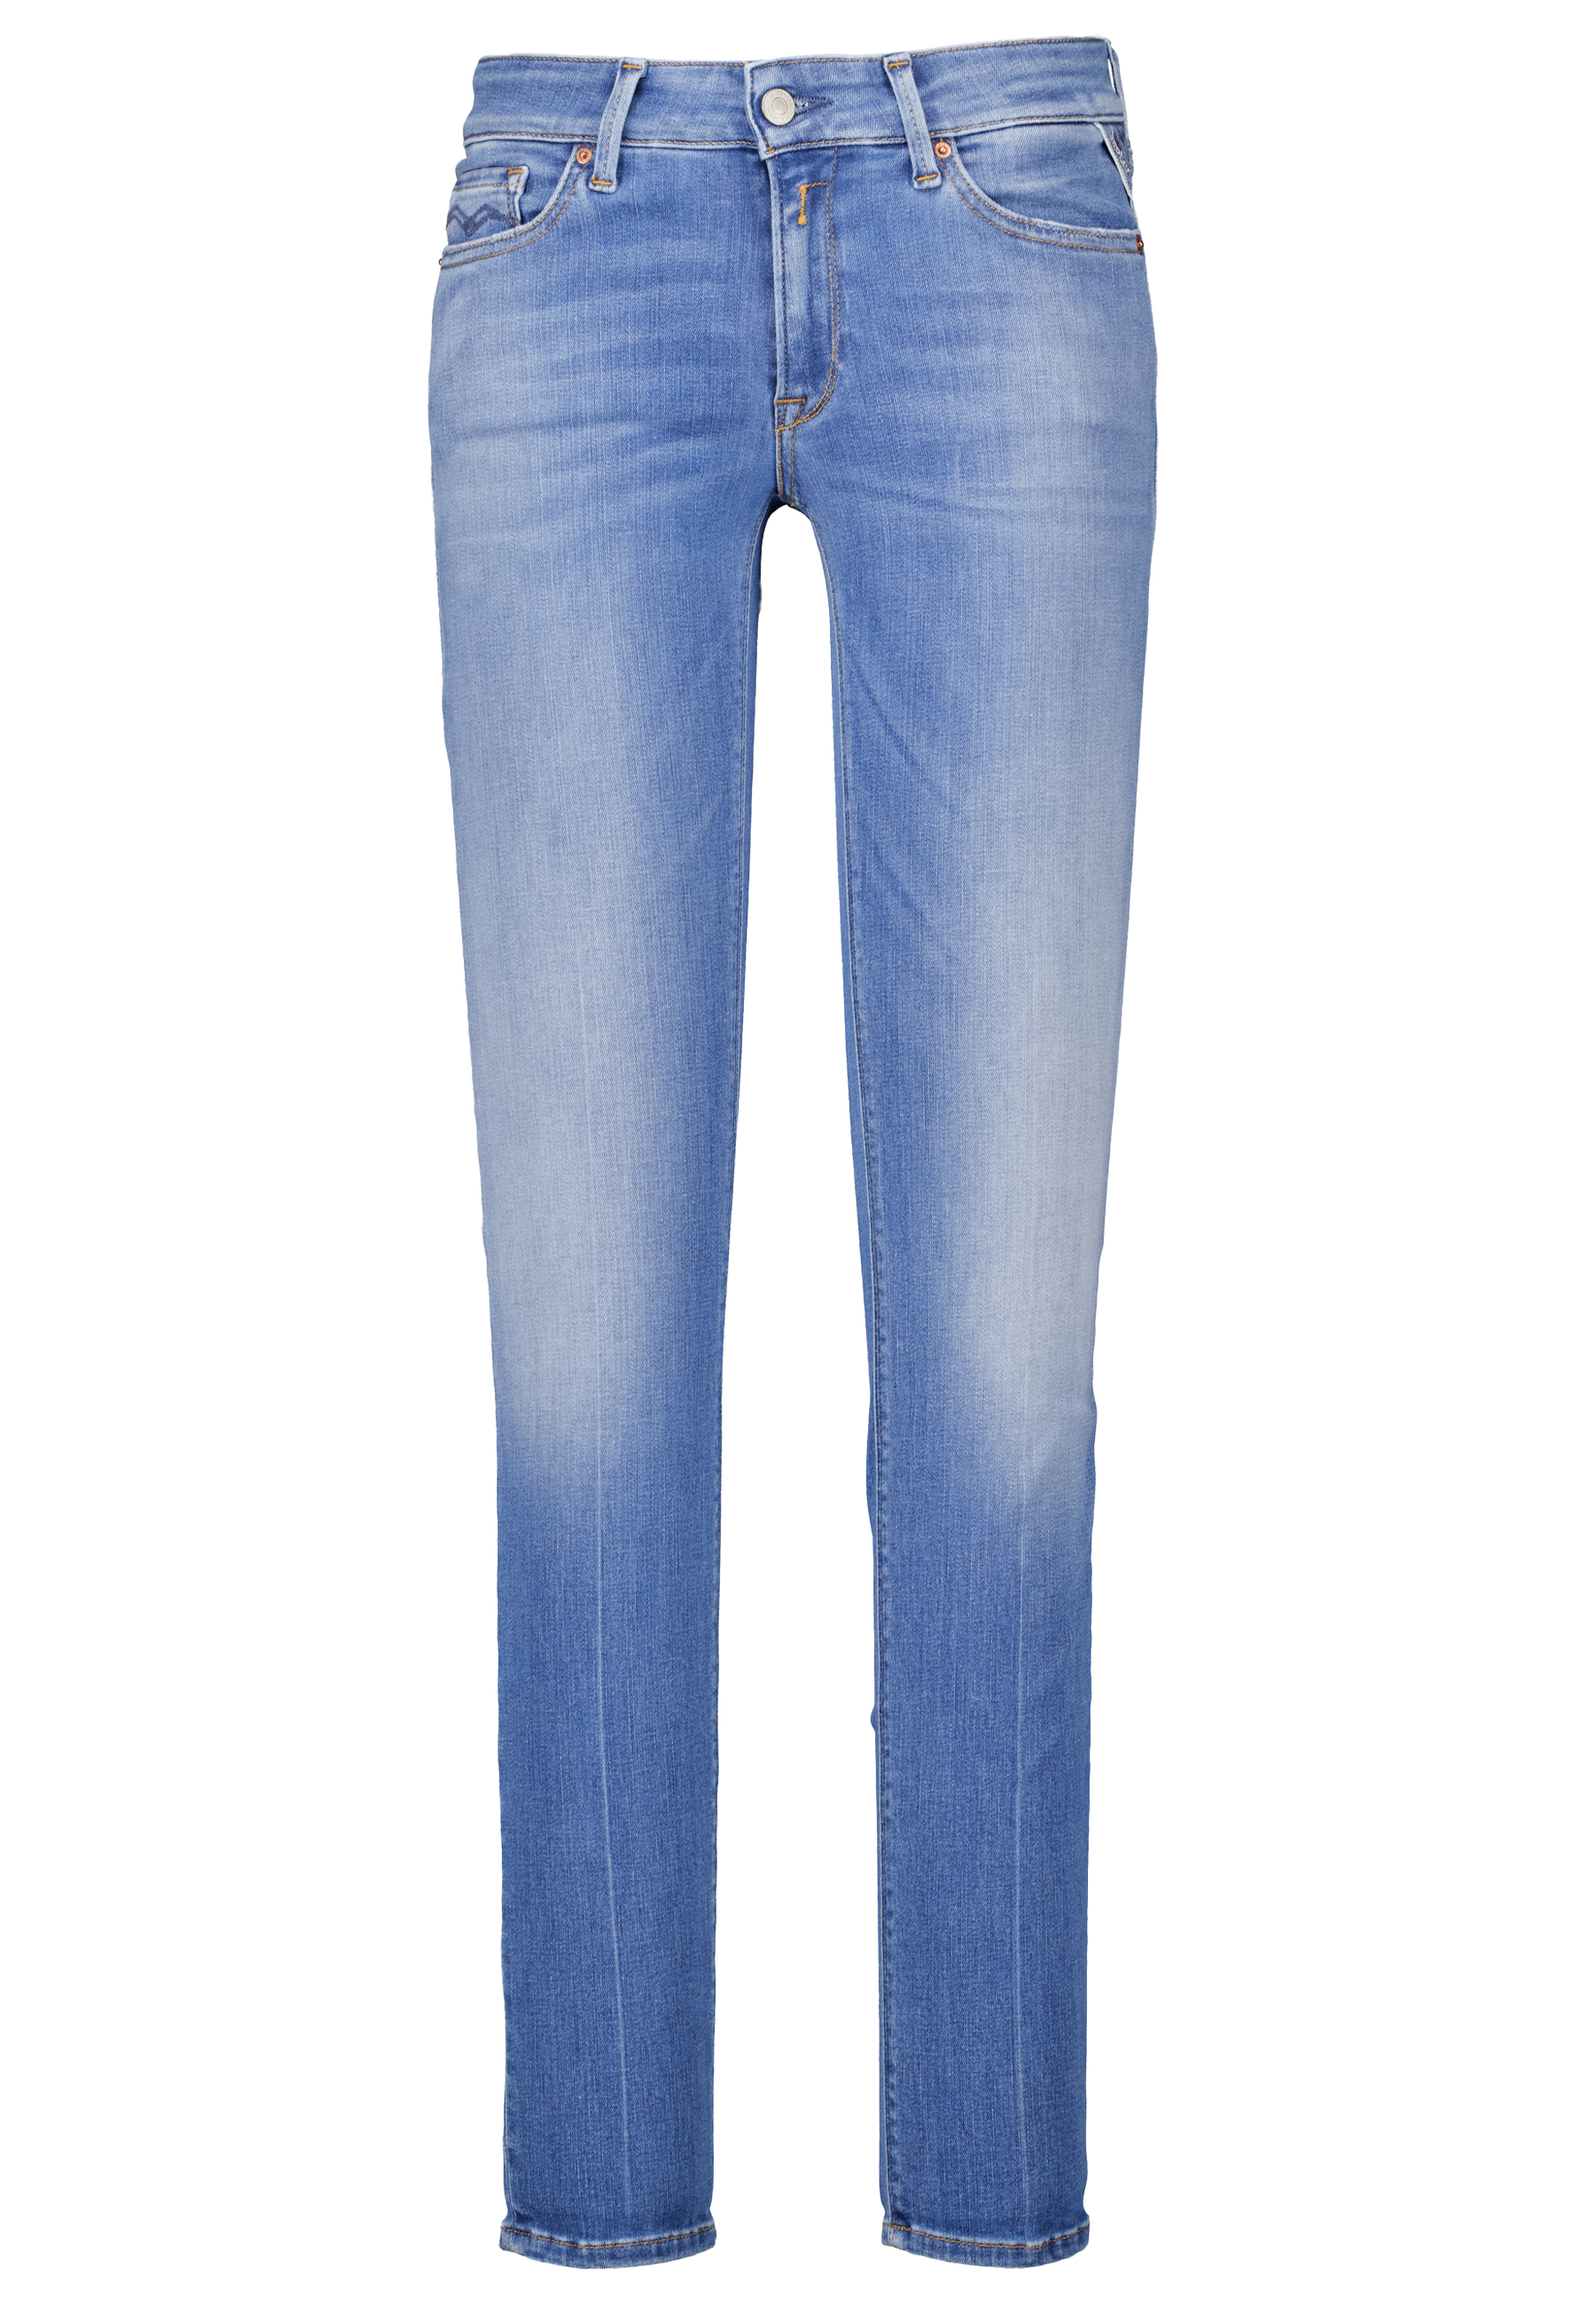 Replay jeans jeans Dames maat 26/32